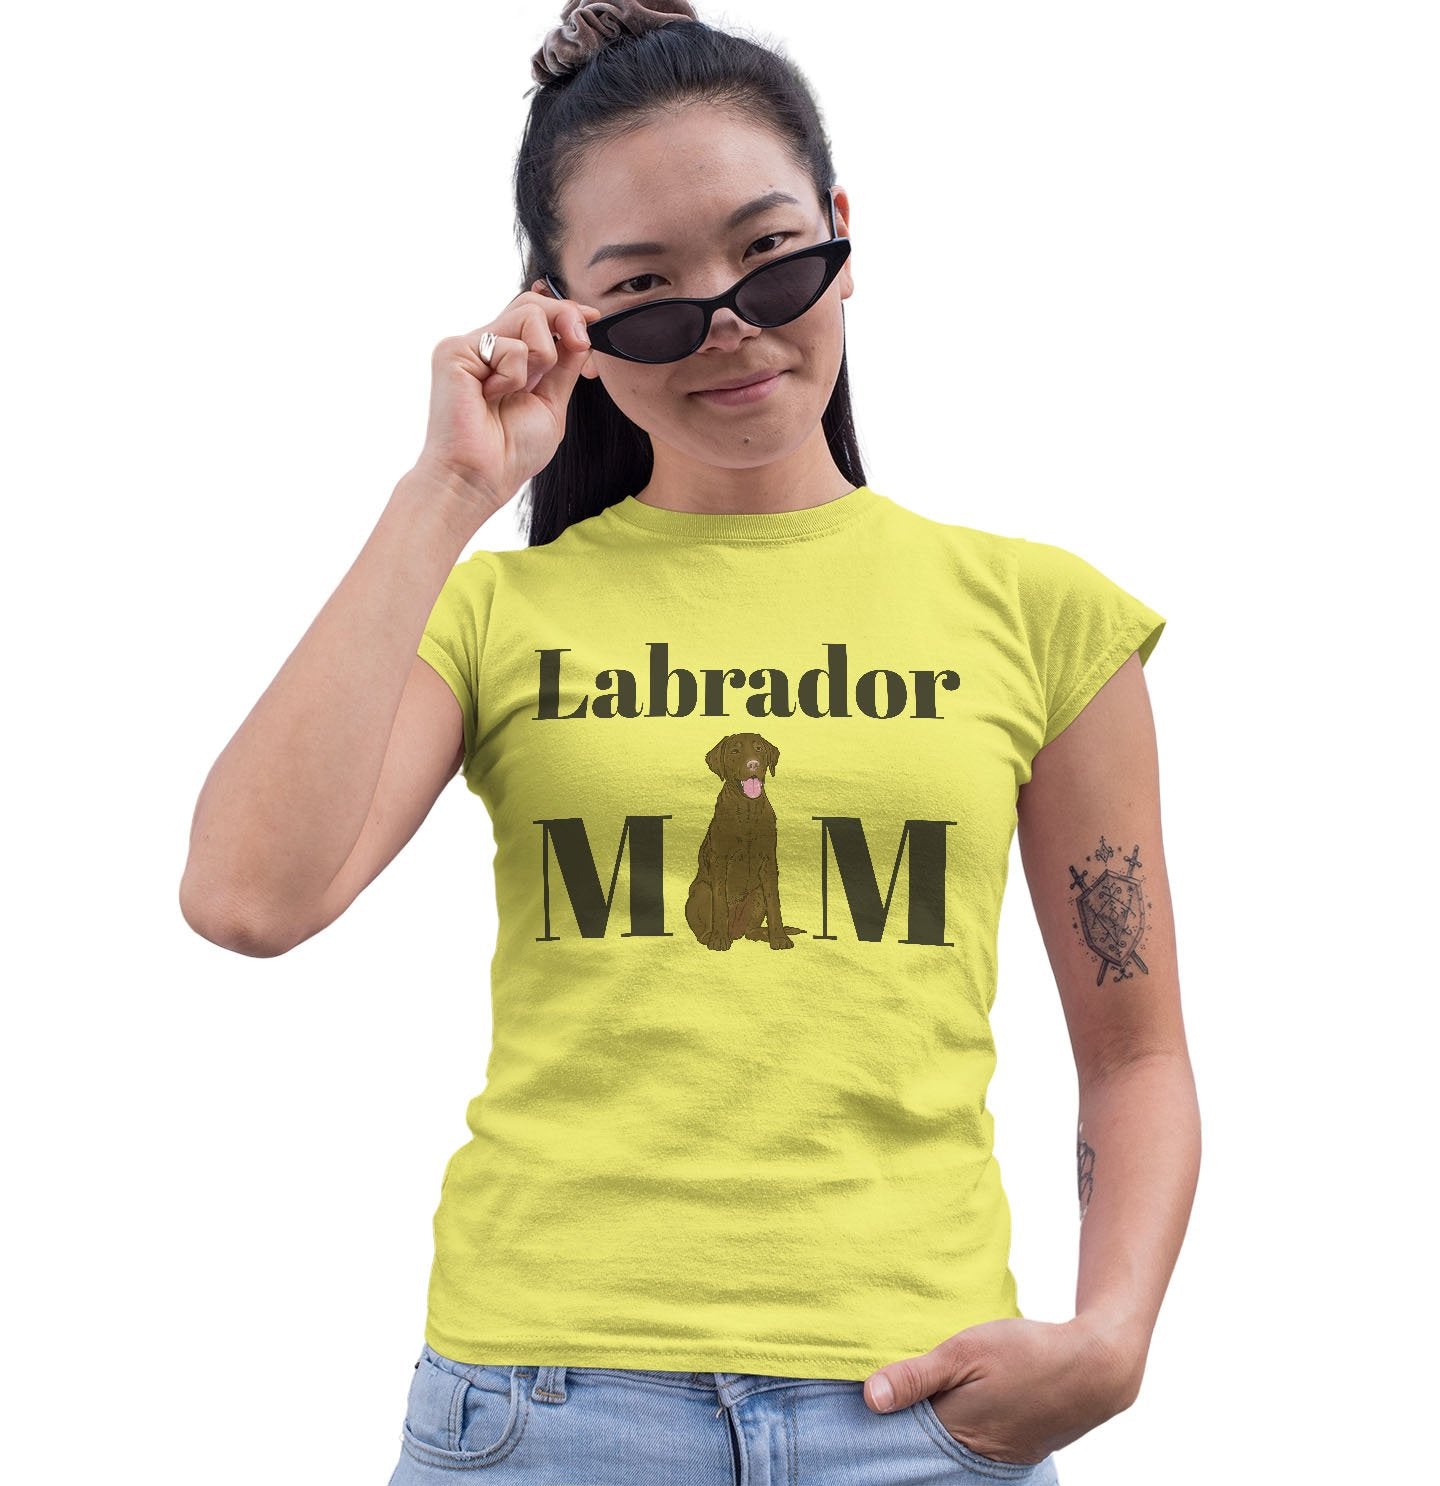 Chocolate Labrador Mom Illustration - Women's Fitted T-Shirt